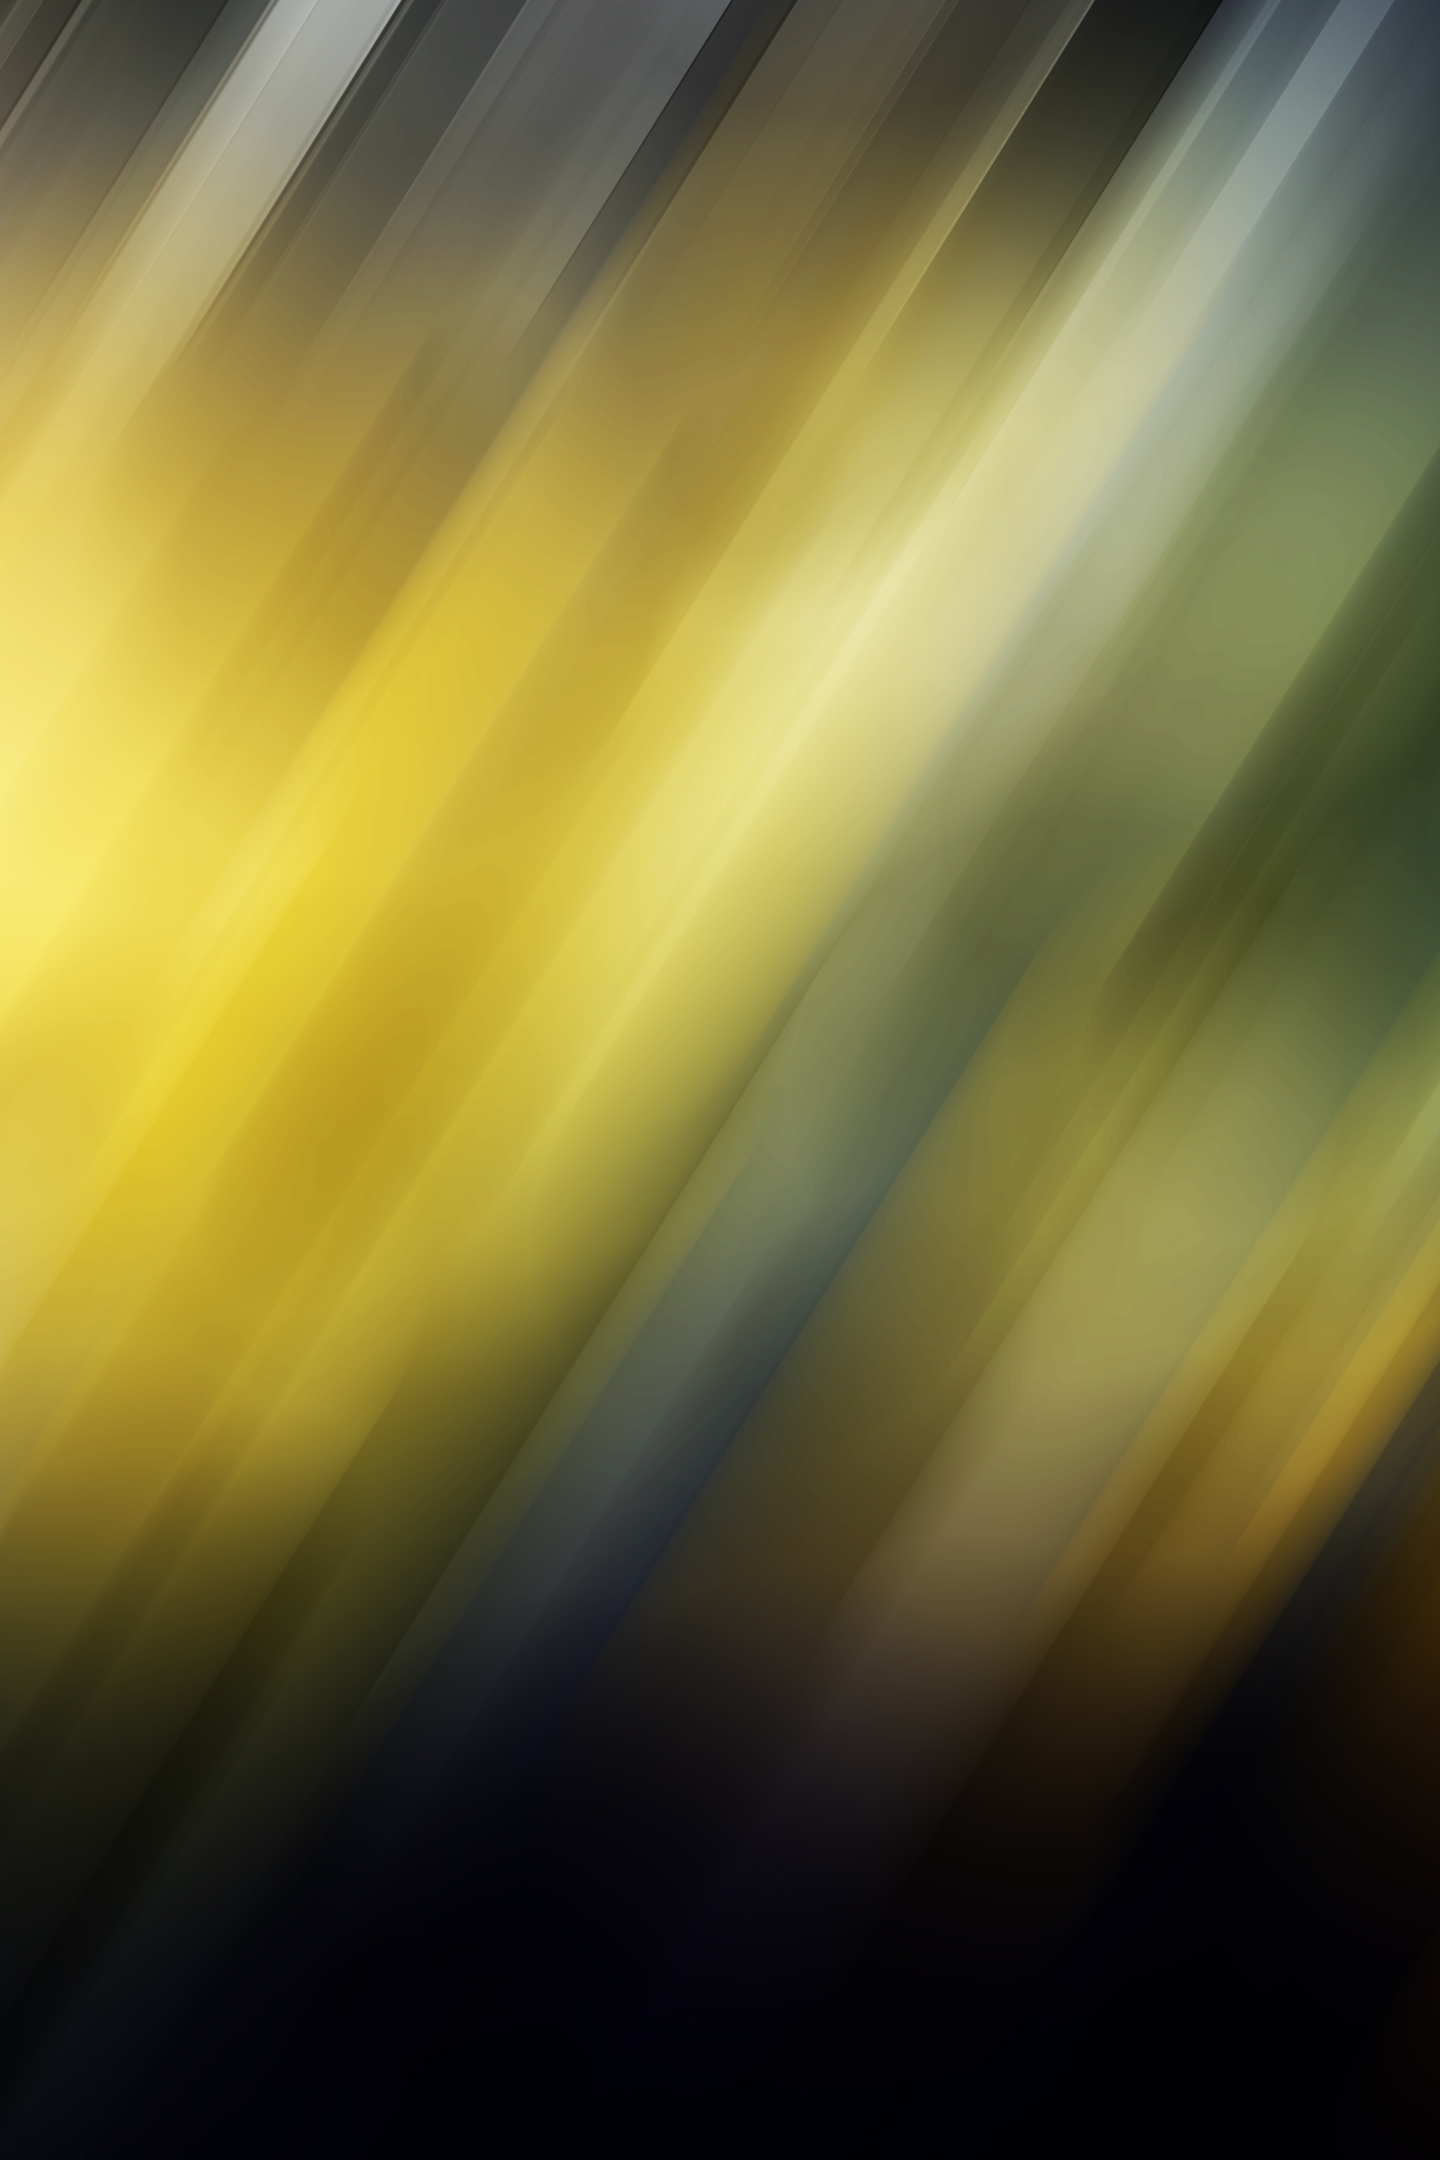 Image: blur effect, background, rays, lines